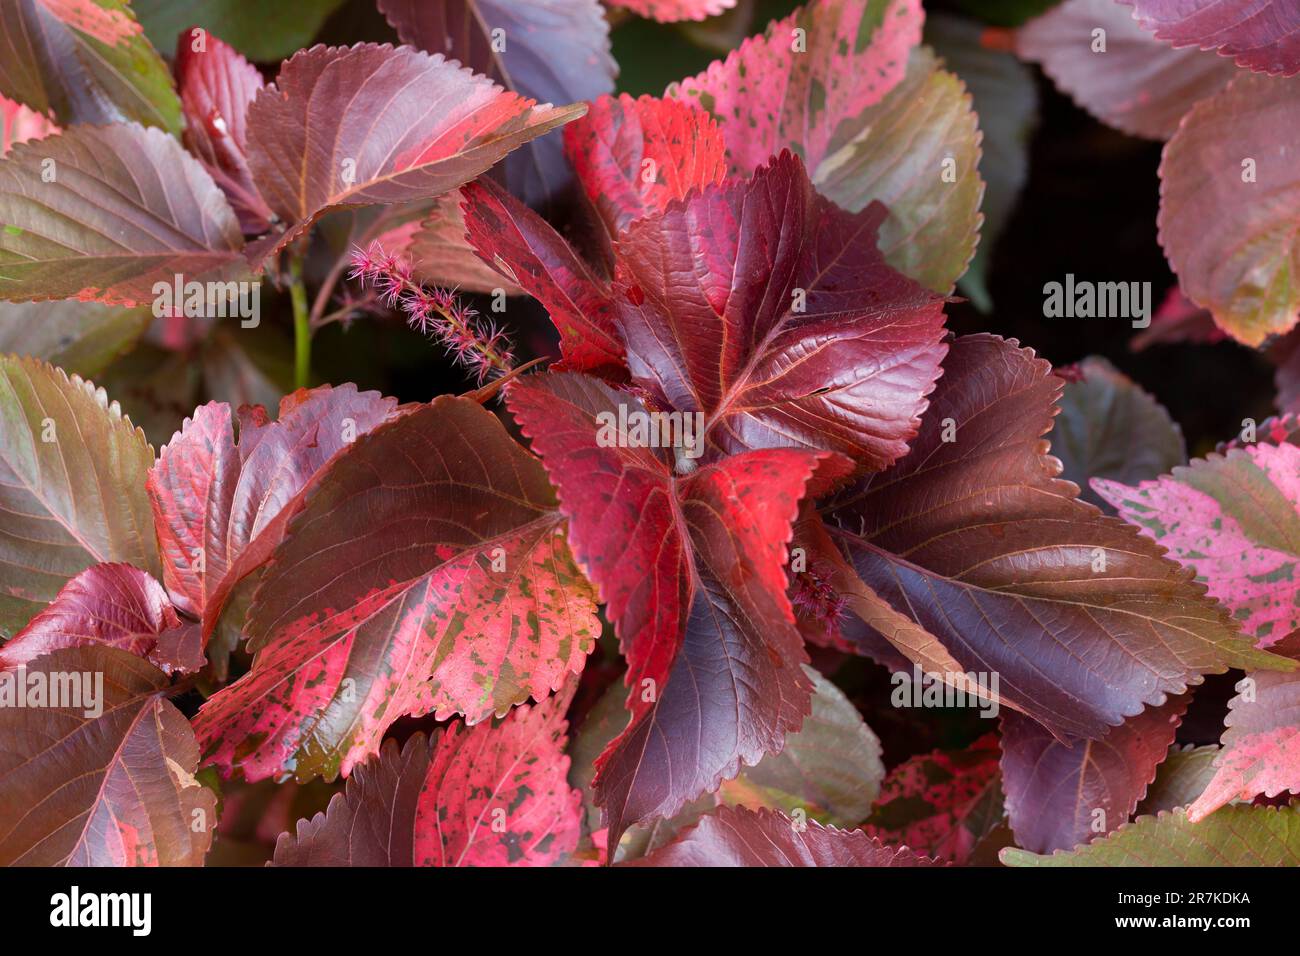 Red leaf Copperleaf or Acalypha wilkesiana or Mosaica ornamental house plant. background of red leaves Stock Photo